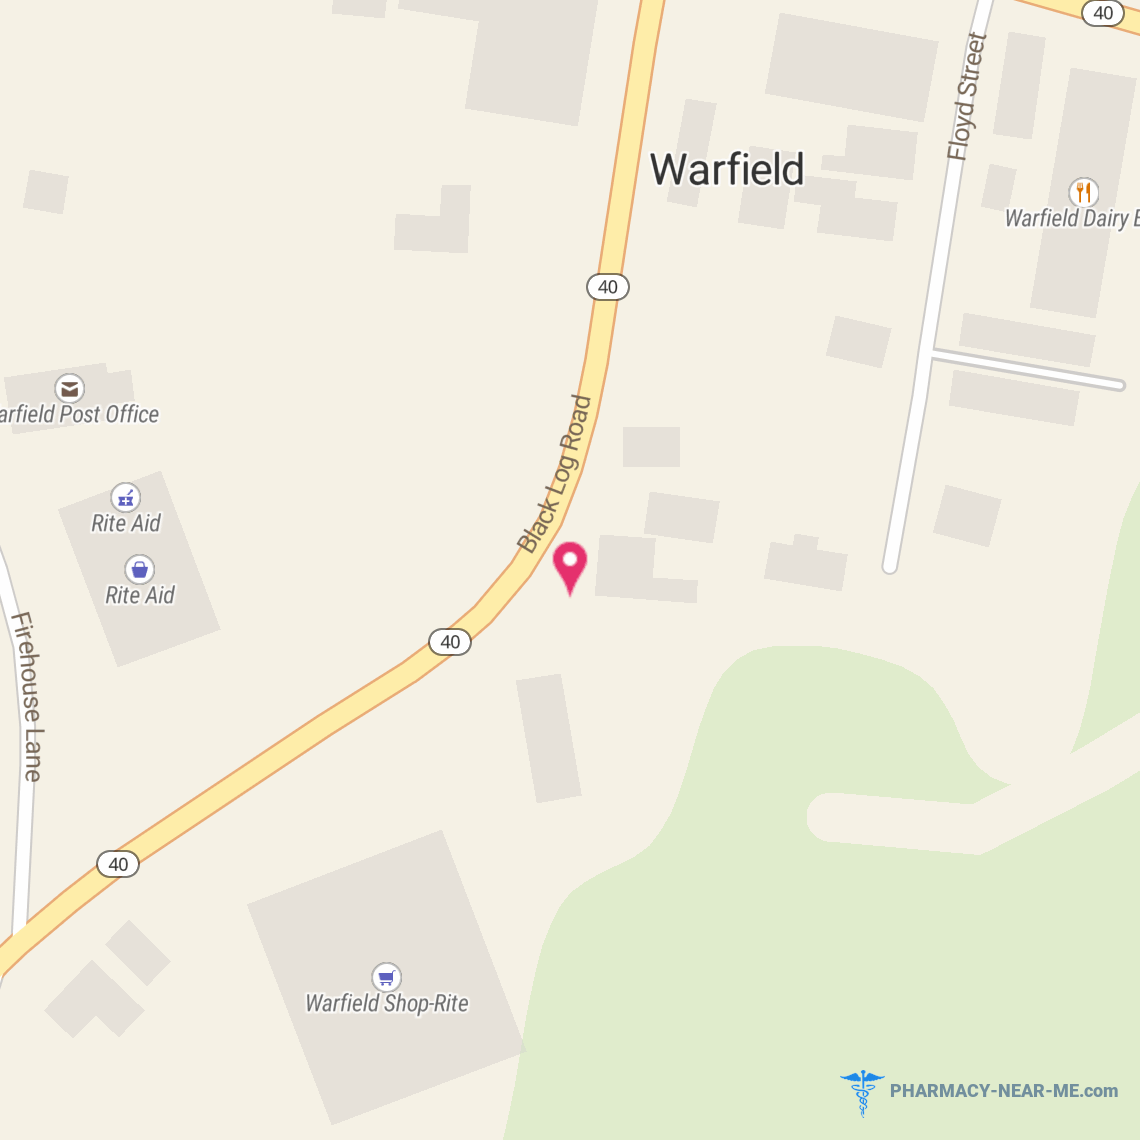 WARFIELD PRESCRIPTION CENTER - Pharmacy Hours, Phone, Reviews & Information: 9251 Beauty Rd, Warfield, Kentucky 41267, United States